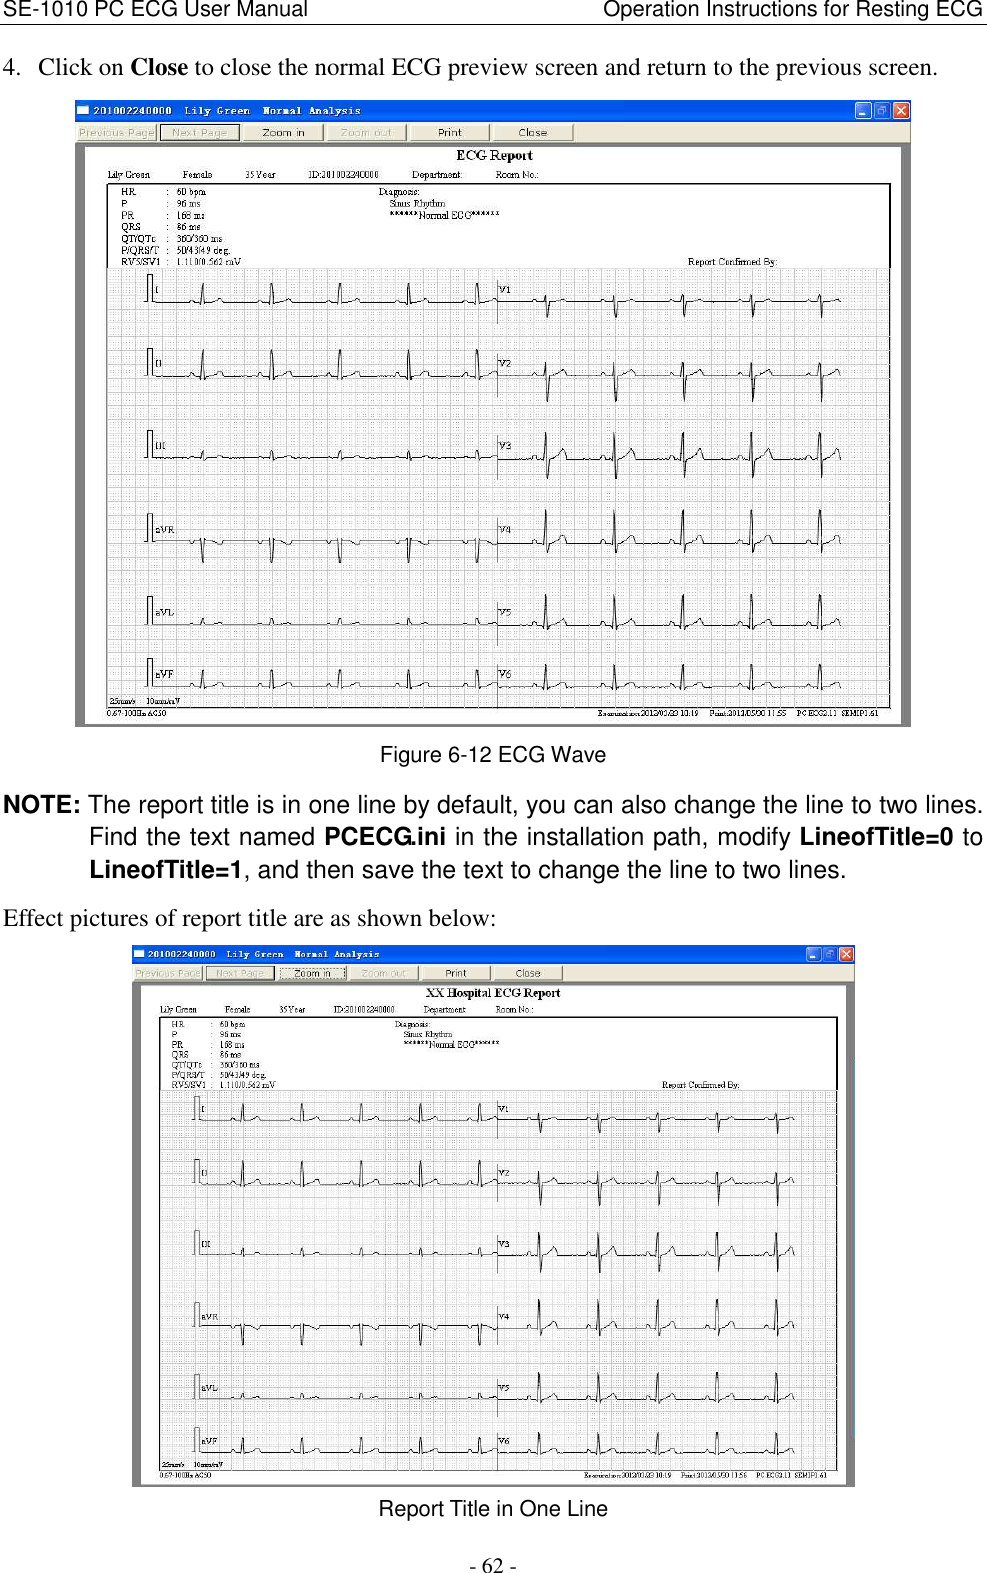 SE-1010 PC ECG User Manual                                                      Operation Instructions for Resting ECG - 62 - 4. Click on Close to close the normal ECG preview screen and return to the previous screen.  Figure 6-12 ECG Wave NOTE: The report title is in one line by default, you can also change the line to two lines. Find the text named PCECG.ini in the installation path, modify LineofTitle=0 to LineofTitle=1, and then save the text to change the line to two lines.   Effect pictures of report title are as shown below:  Report Title in One Line 